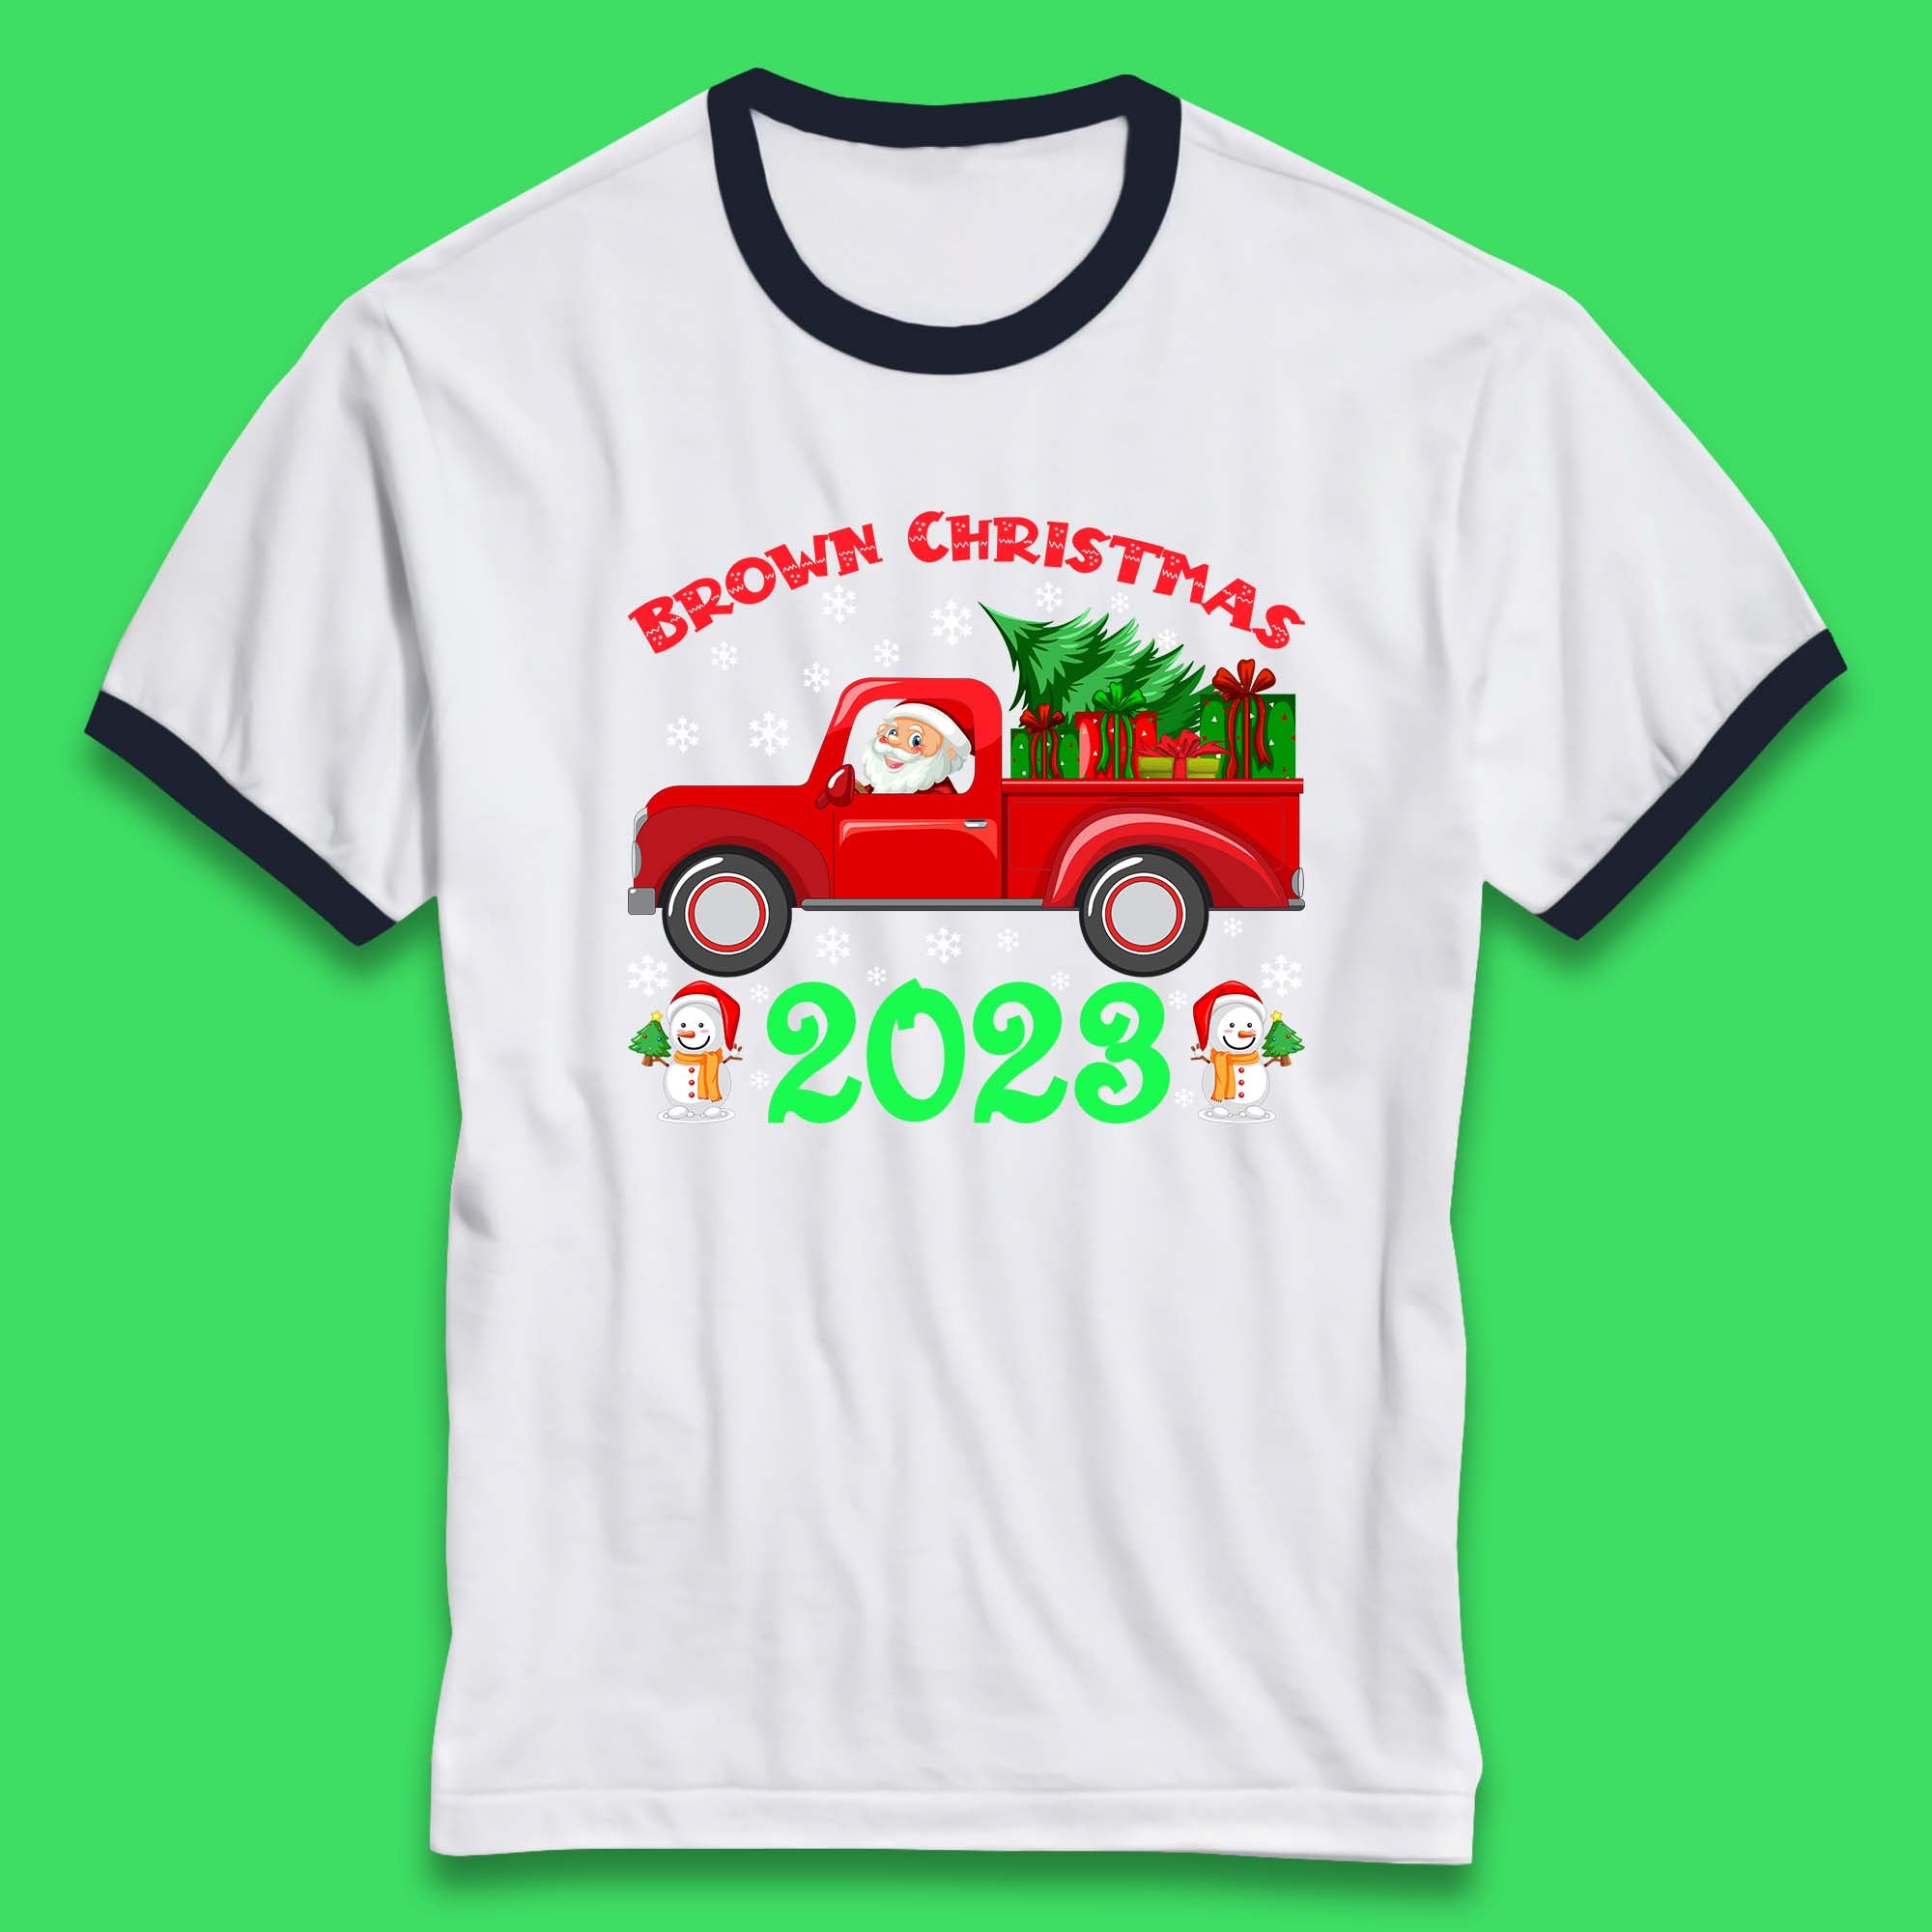 Brown Christmas 2023 Santa Claus Driving Truck With Christmas Tree To Delivery Christmas Gifts Xmas Ringer T Shirt